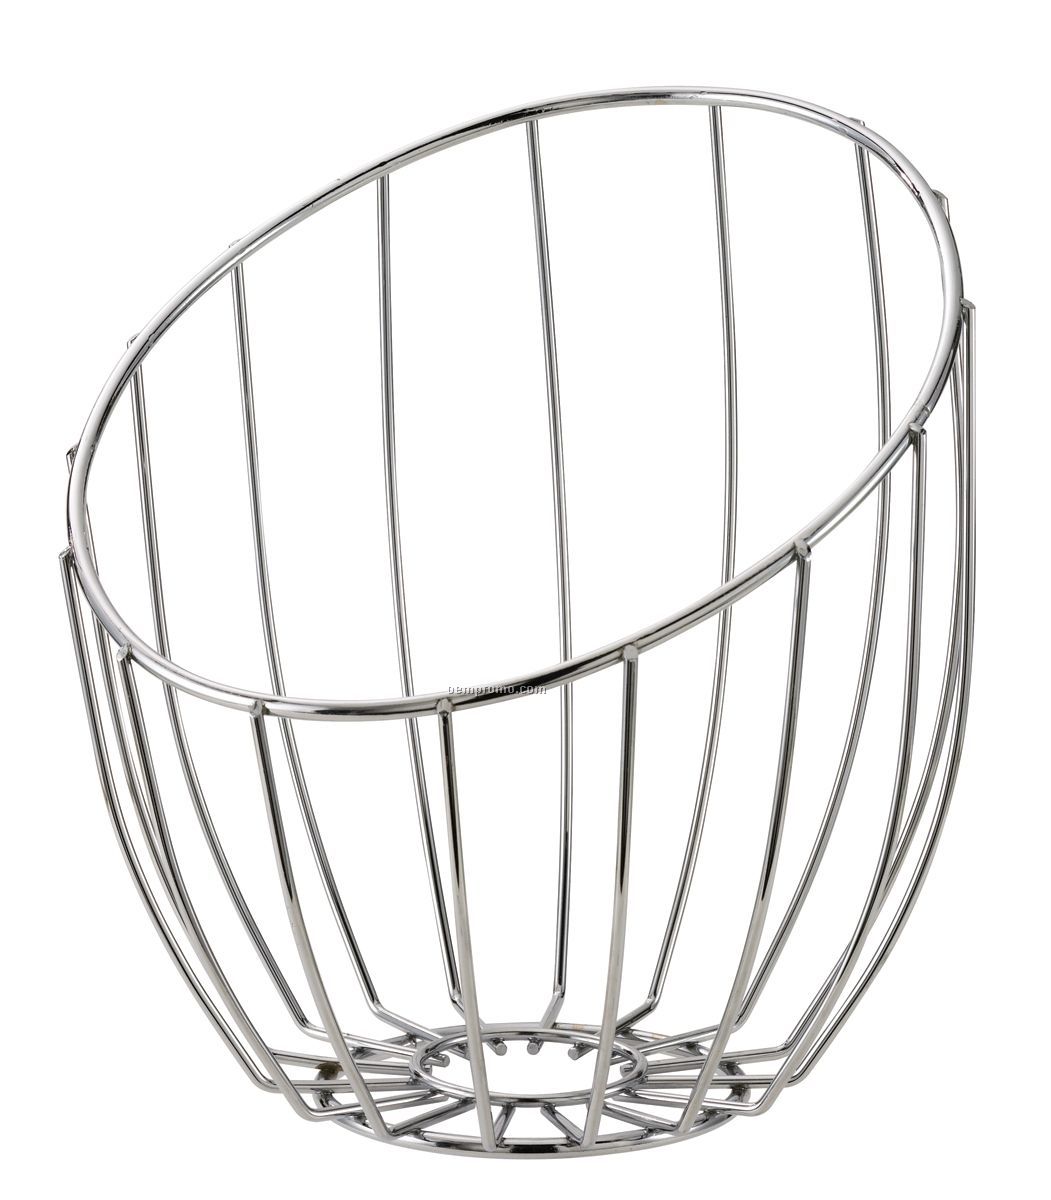 Chromed Metal Stainless Steel Wire Tall Bread Basket